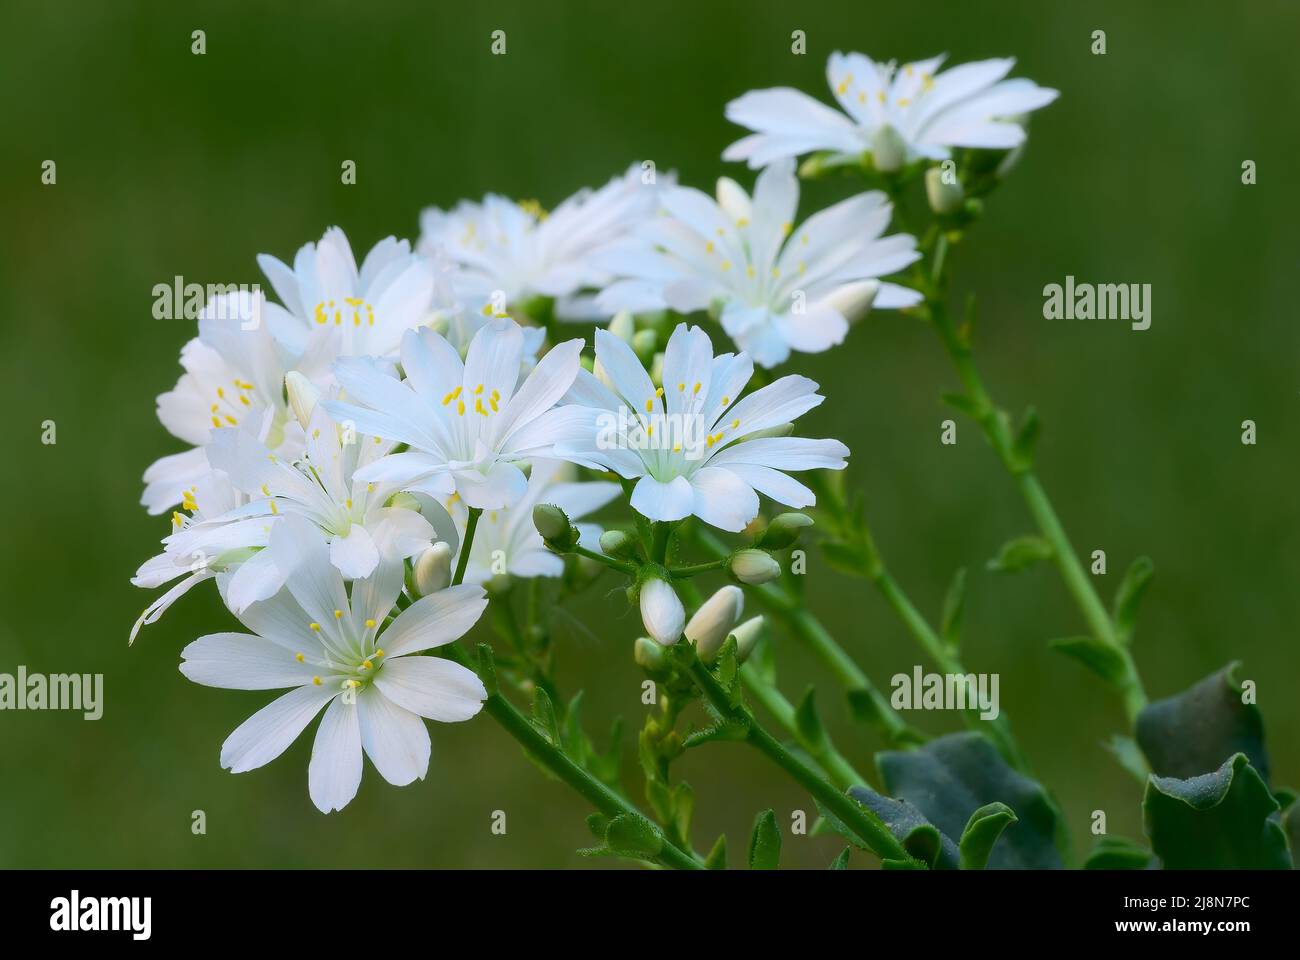 Blossom Lewisia cotyledon beautiful white flowers with buds, closeup. Rock plant. Blurred natural green background. Trencin, Slovakia. Stock Photo